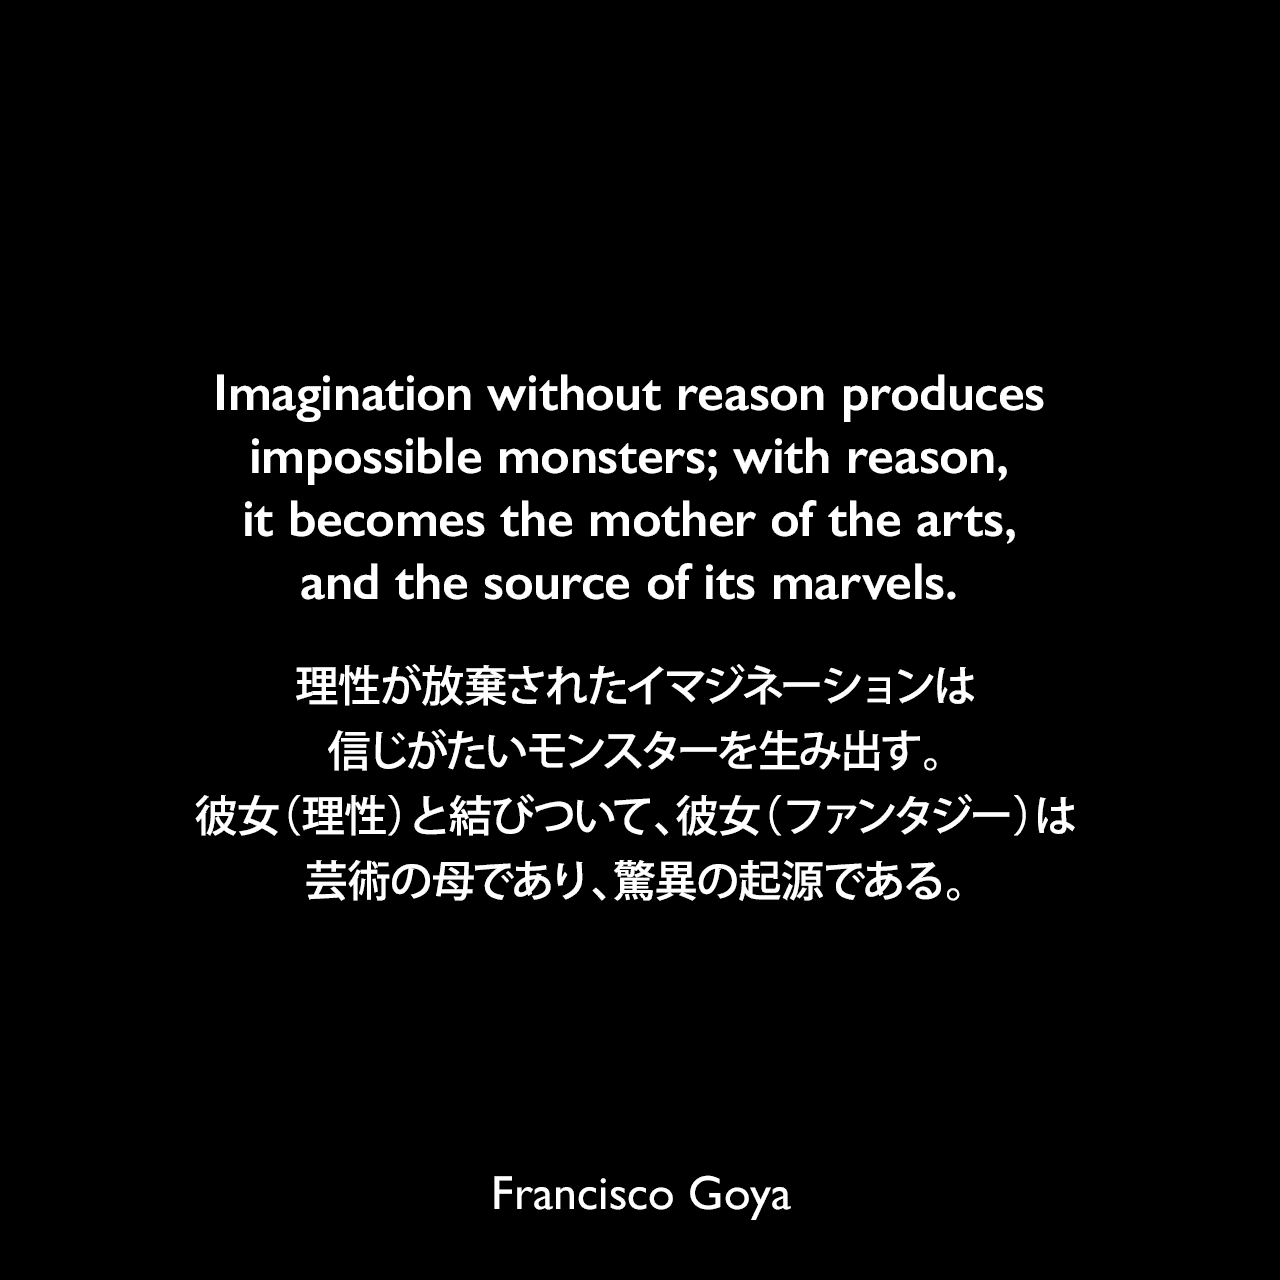 Imagination without reason produces impossible monsters; with reason, it becomes the mother of the arts, and the source of its marvels.理性が放棄されたイマジネーションは信じがたいモンスターを生み出す。彼女（理性）と結びついて、彼女（ファンタジー）は芸術の母であり、驚異の起源である。- アルバート・フレデリック・キャルバートによる本「Goya; an account of his life and works」よりFrancisco Goya